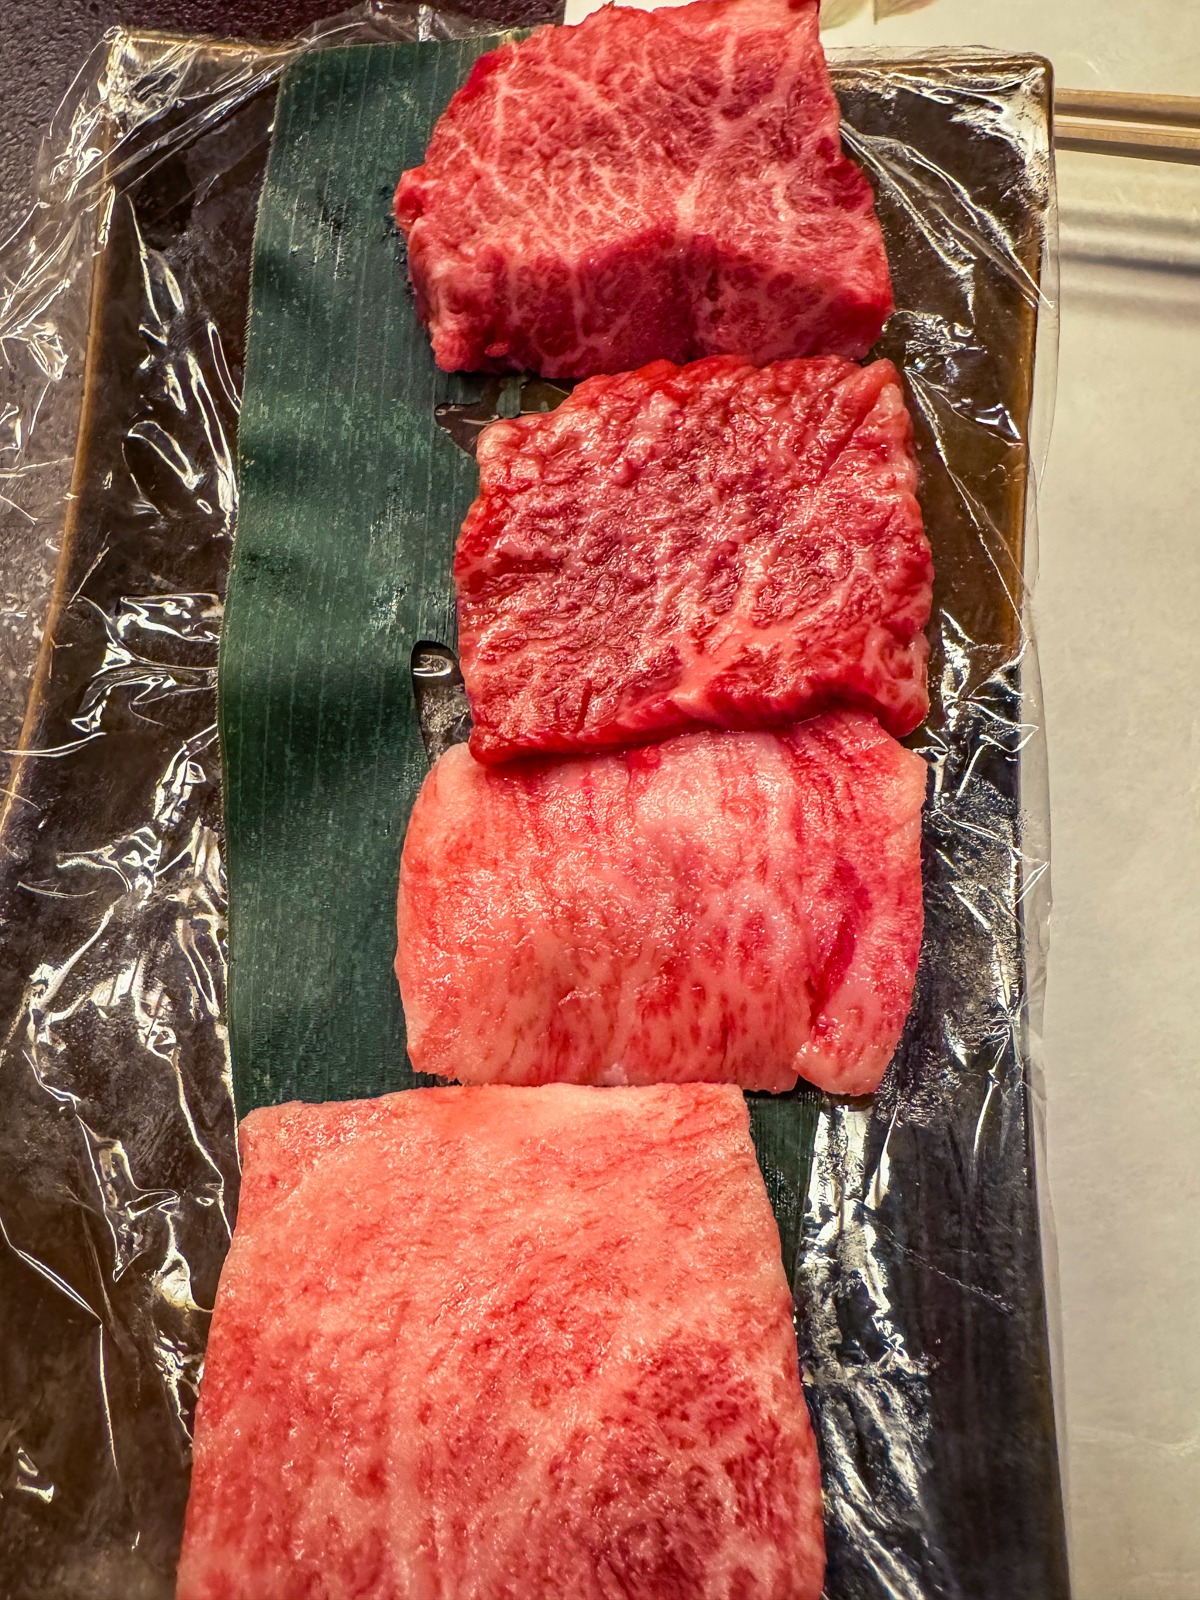 Close-up shots of the 4 pieces of wagyu glistening with marbling.